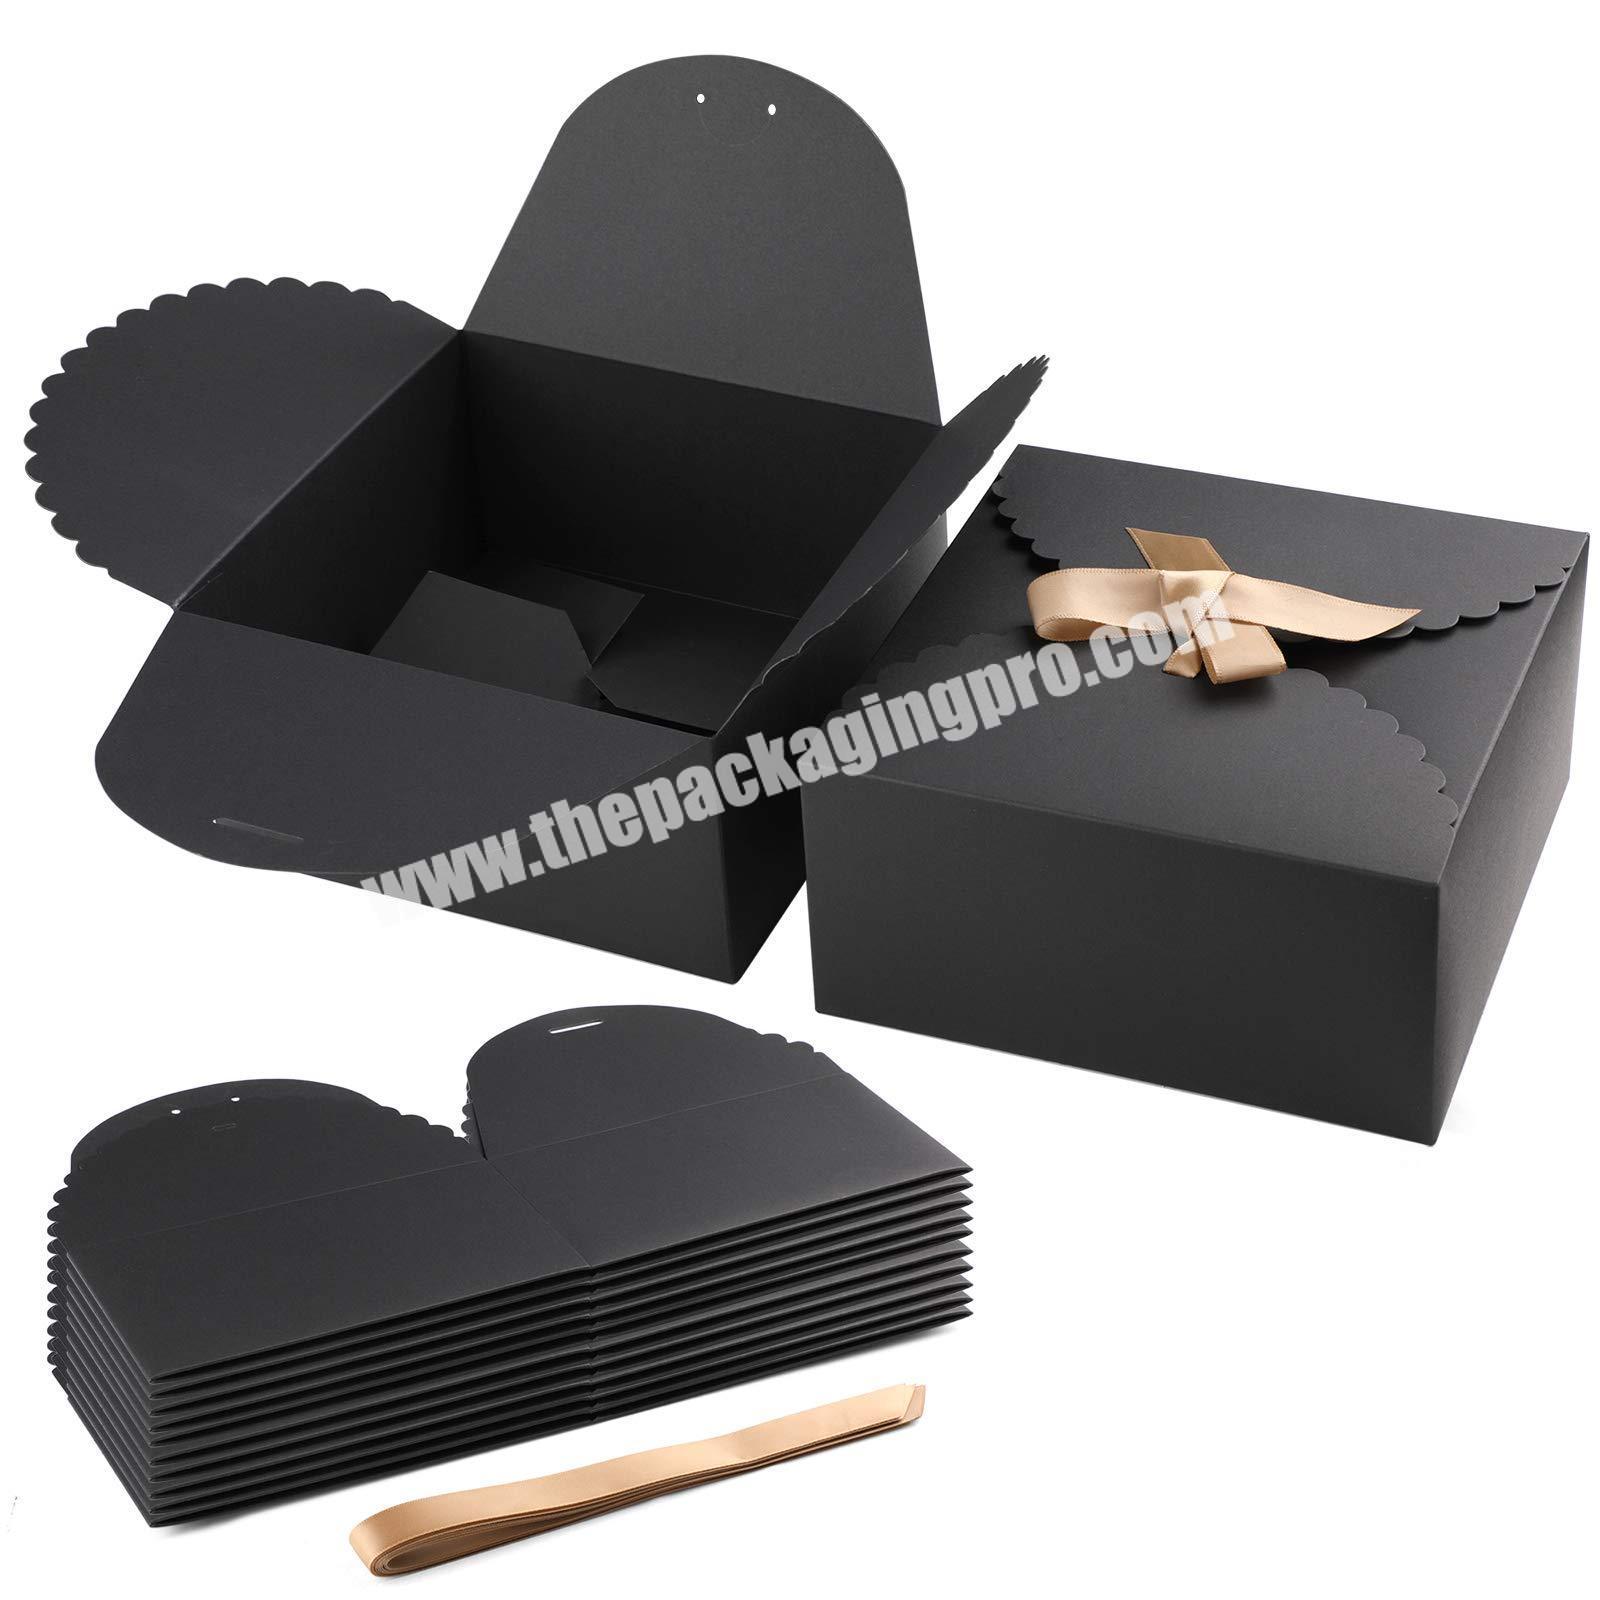 Black Large Gift Box Collapsible for with Crafting Bridal Birthday Party Christmas Father's Day Gift Boxes with Lid